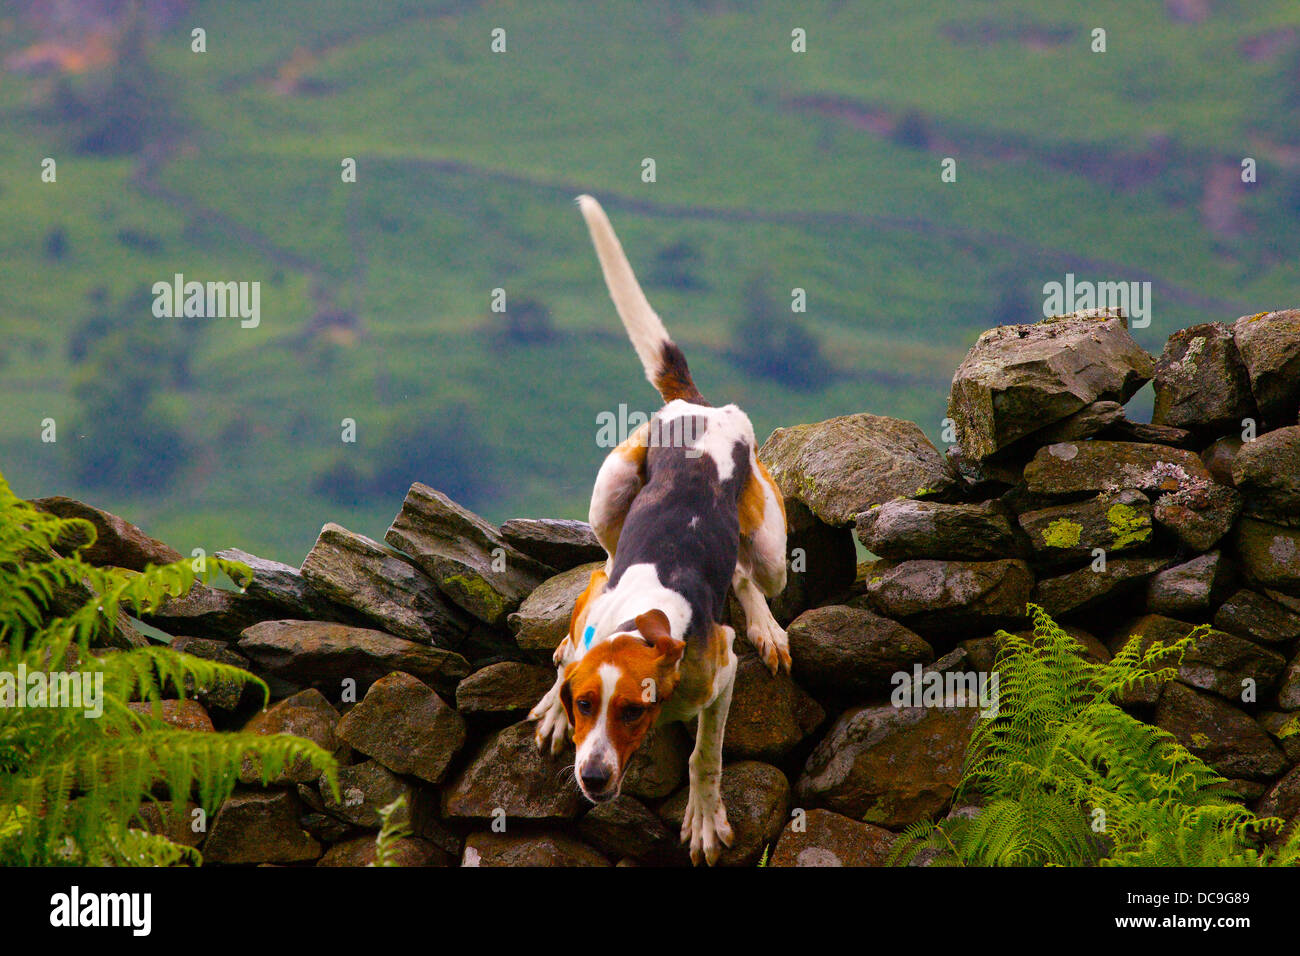 Trail Hound jumping over a dry stone wall Ambleside Sports in The Lake District, Cumbria, England, UK Stock Photo